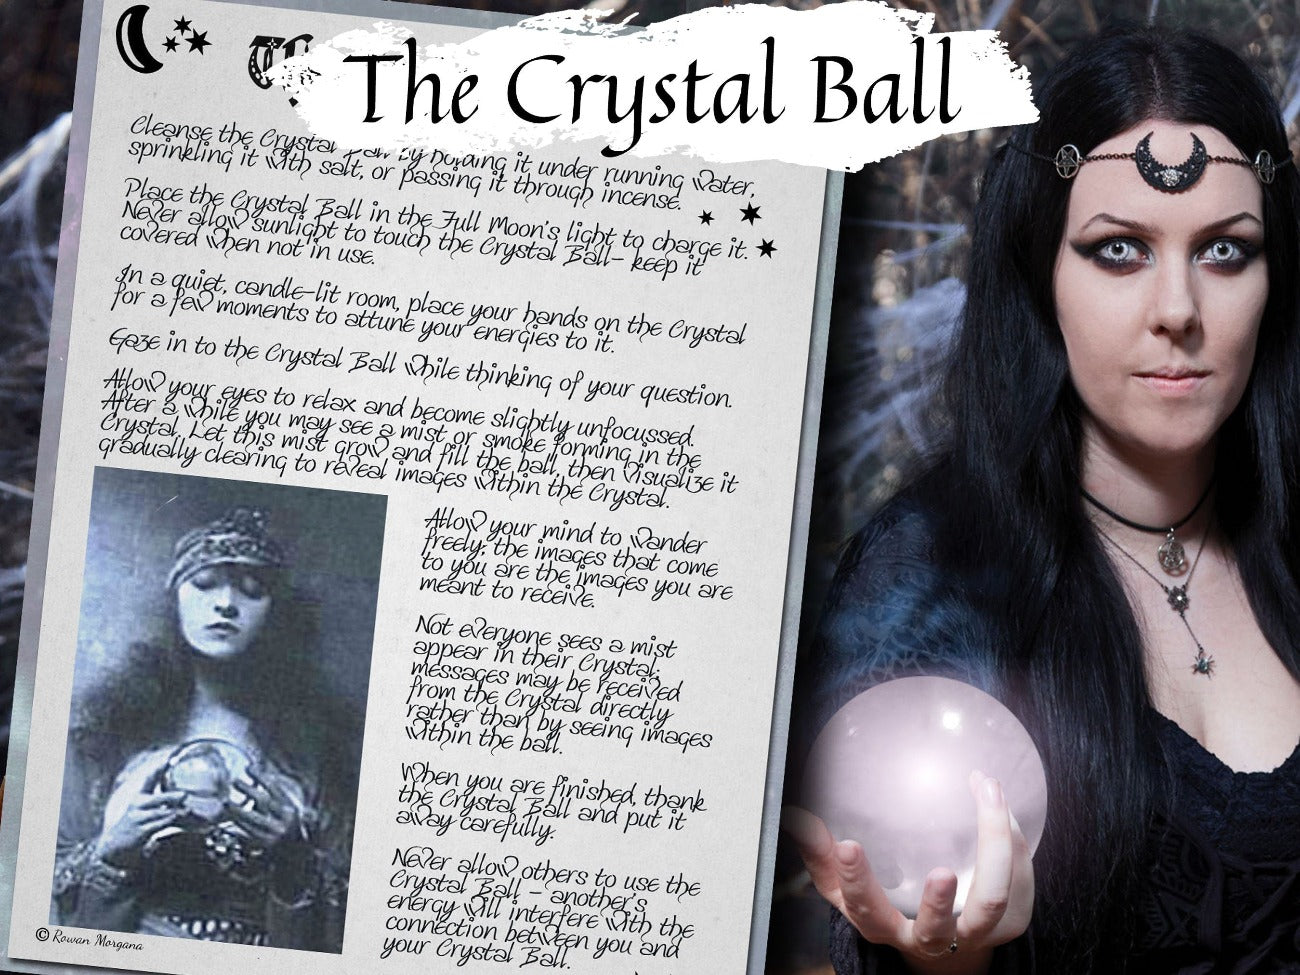 CRYSTAL BALL GUIDE, How to Cleanse Charge & Use, Gazing and Empowering, Scrying Divination, Witchcraft Wicca Fortune Telling, Grimoire